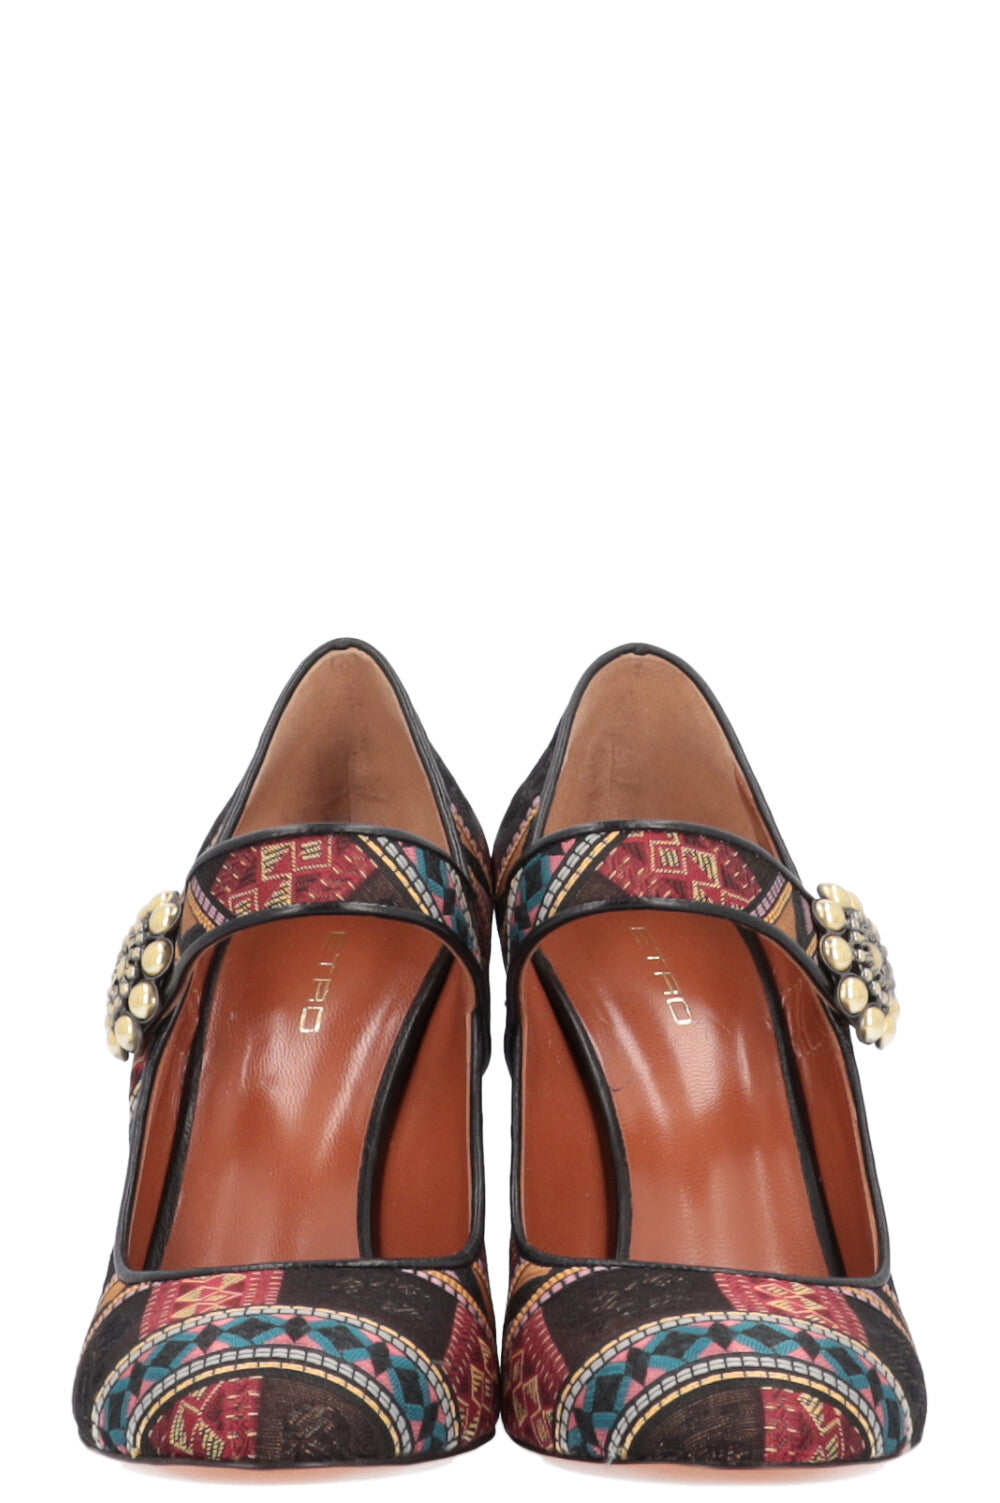 ETRO Heels Embroidery with Flower Buckle